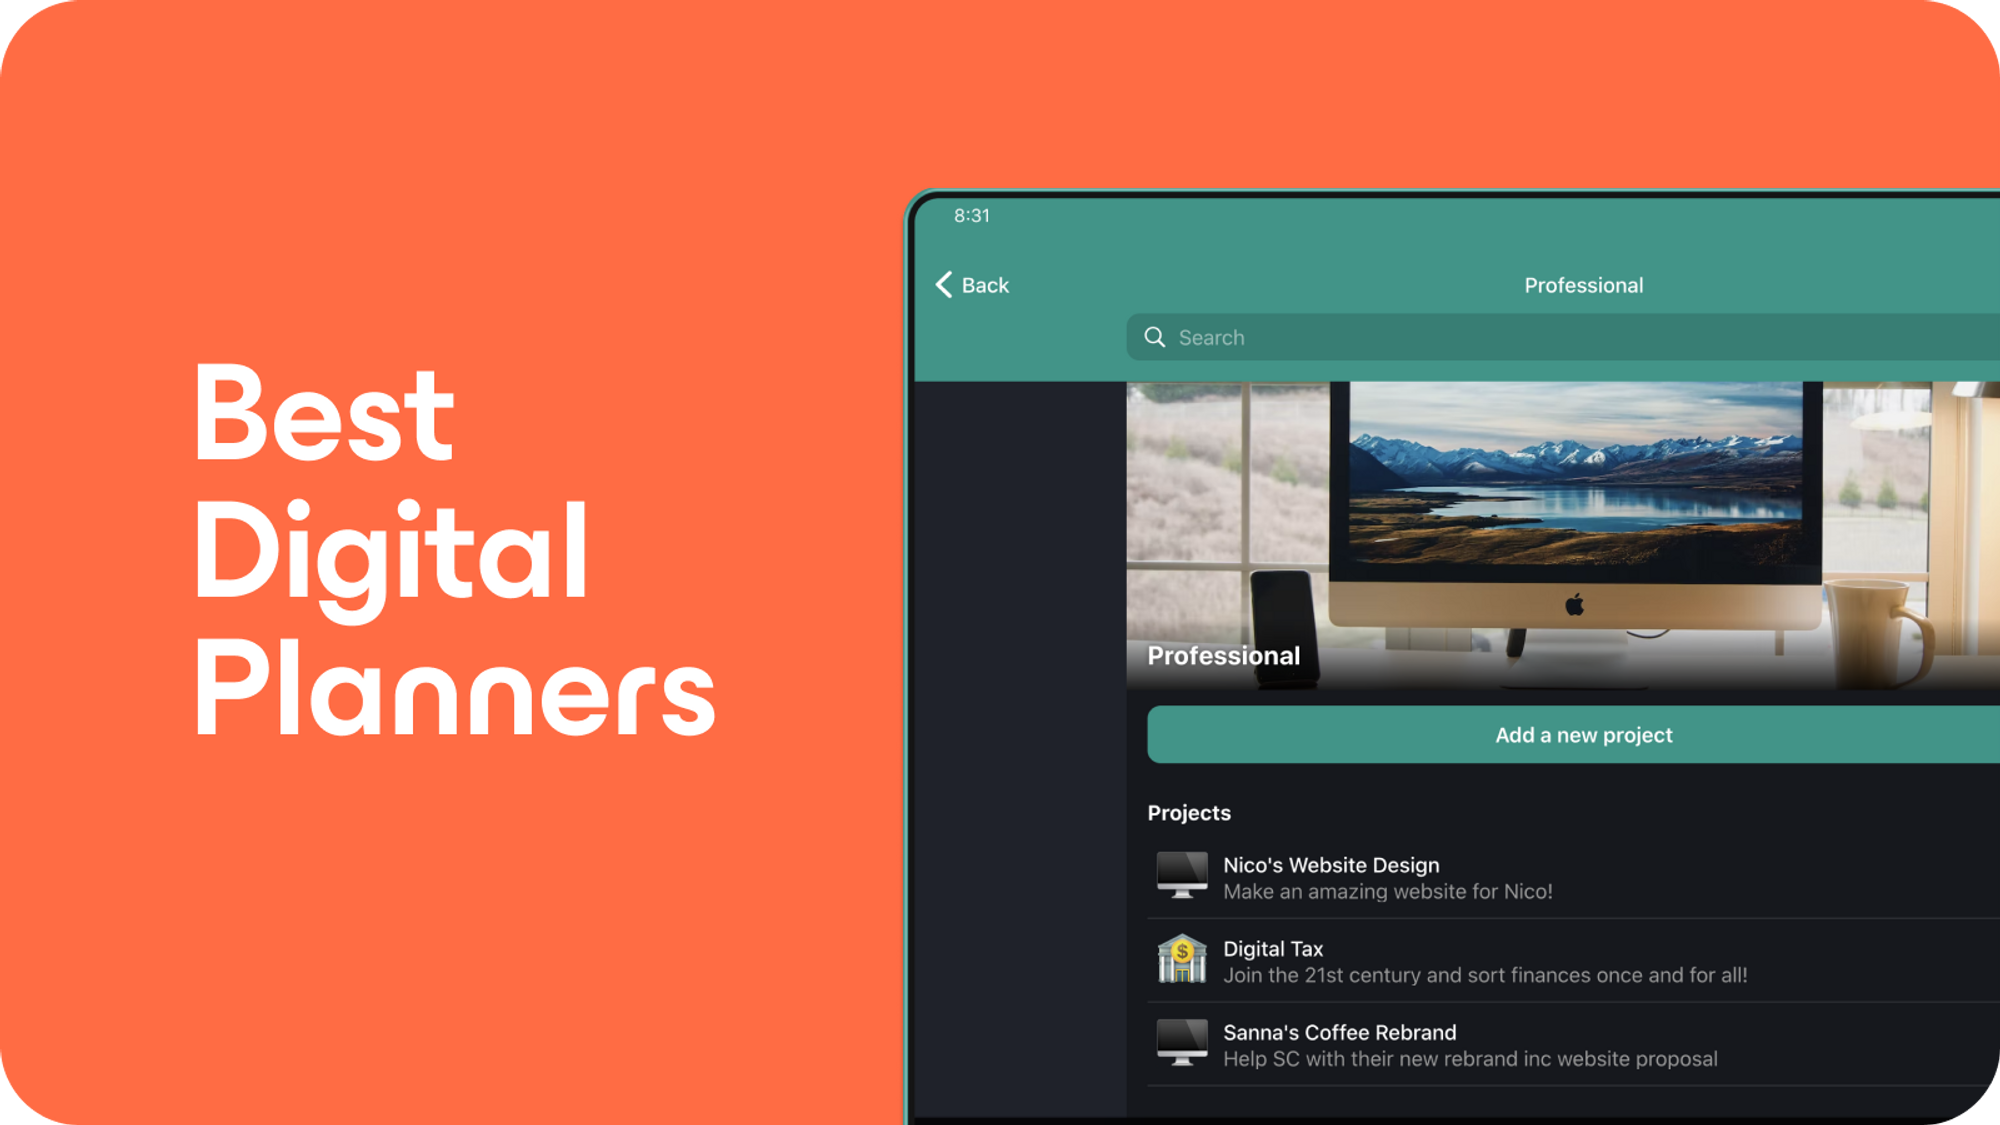 7 Best Digital Planner Tools for Every Walk of Life